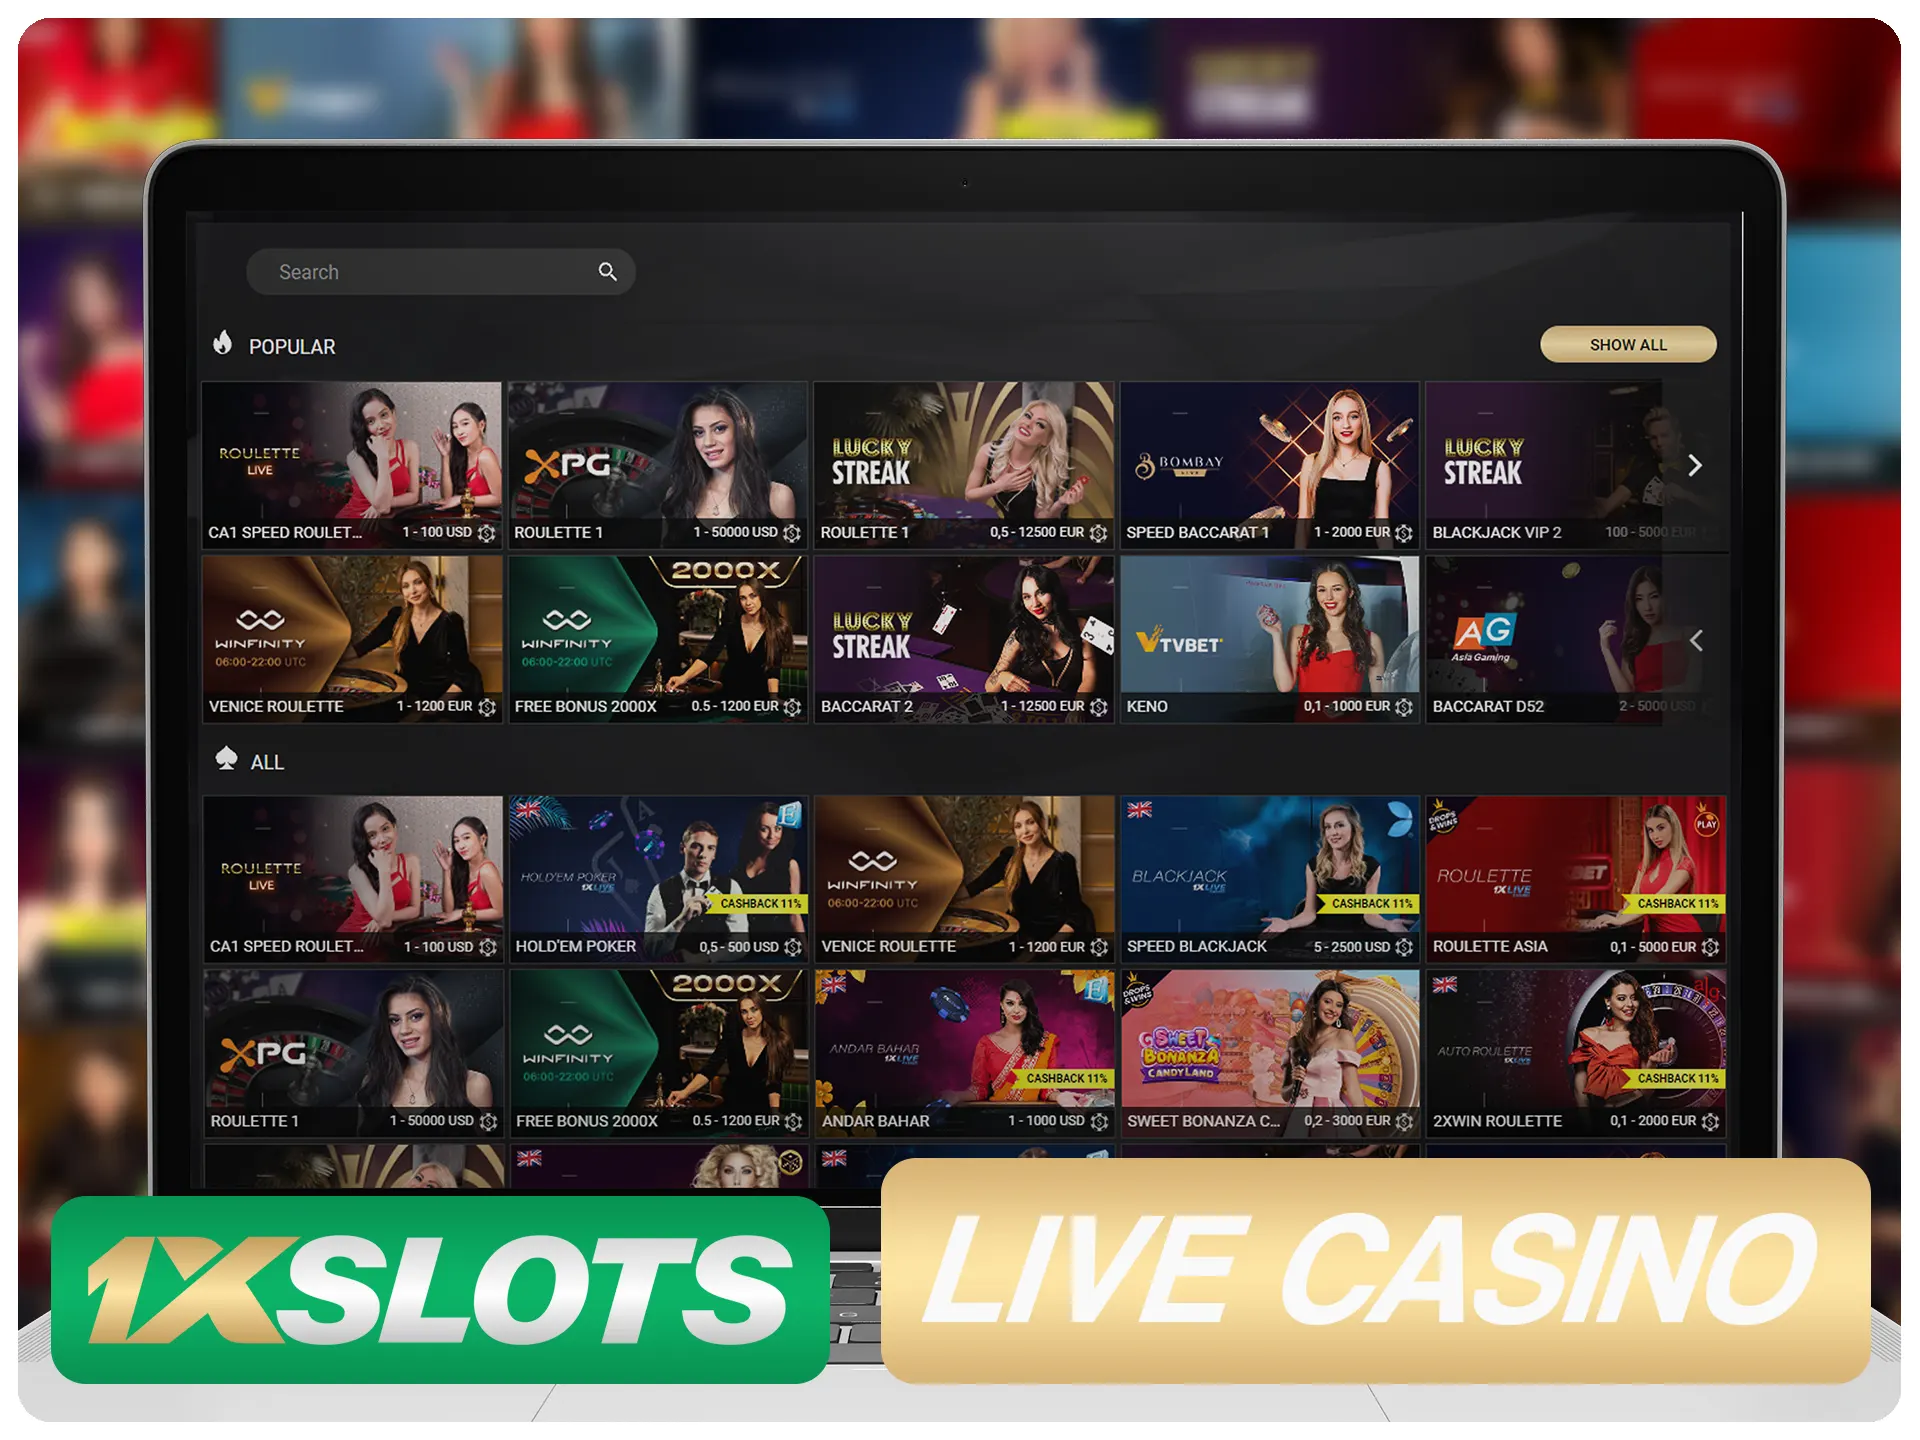 Spnd your time with real people by playing at 1xSlots.